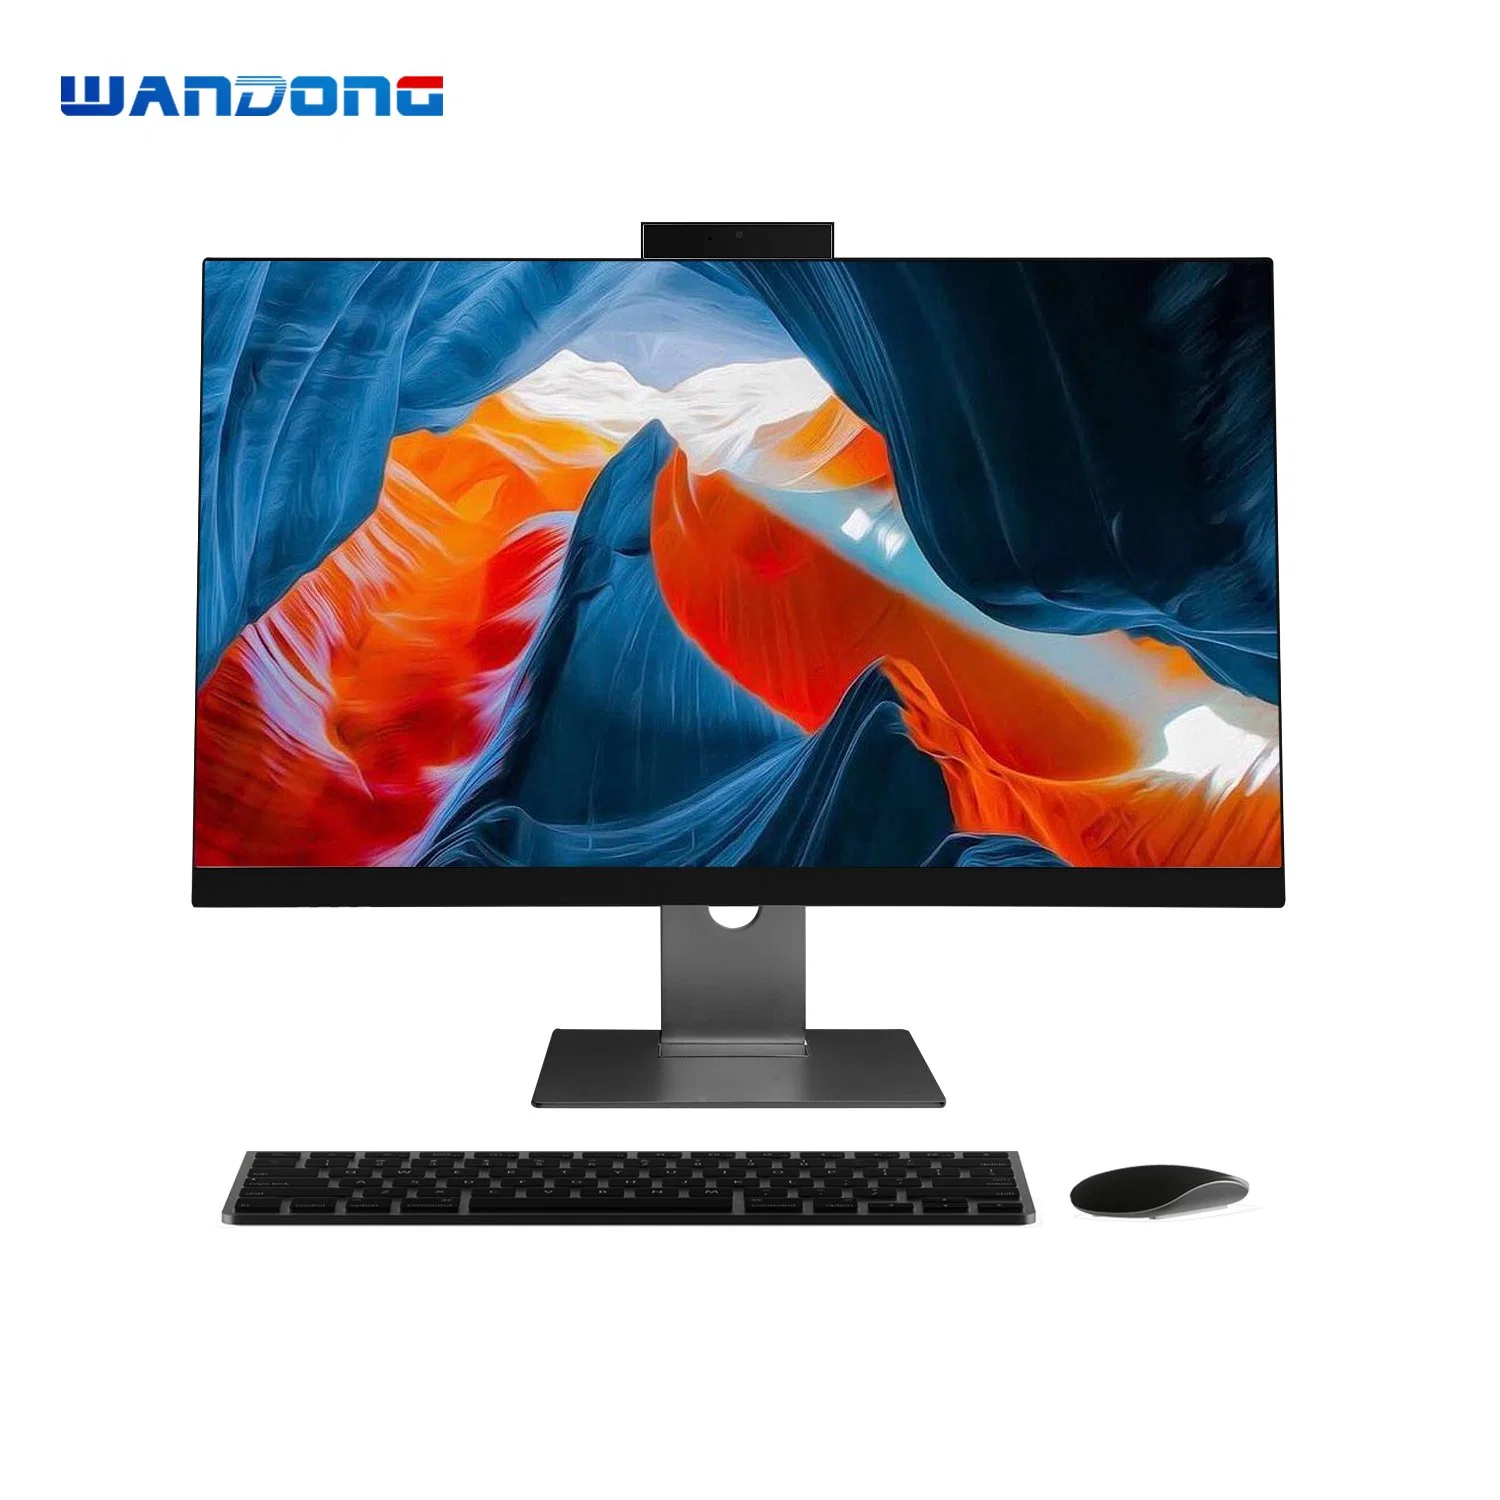 Wandong 24/27 Inch All-in-One Computers Desktop Full Set Black/White Aio Barebone with Lifting Base and Webcam